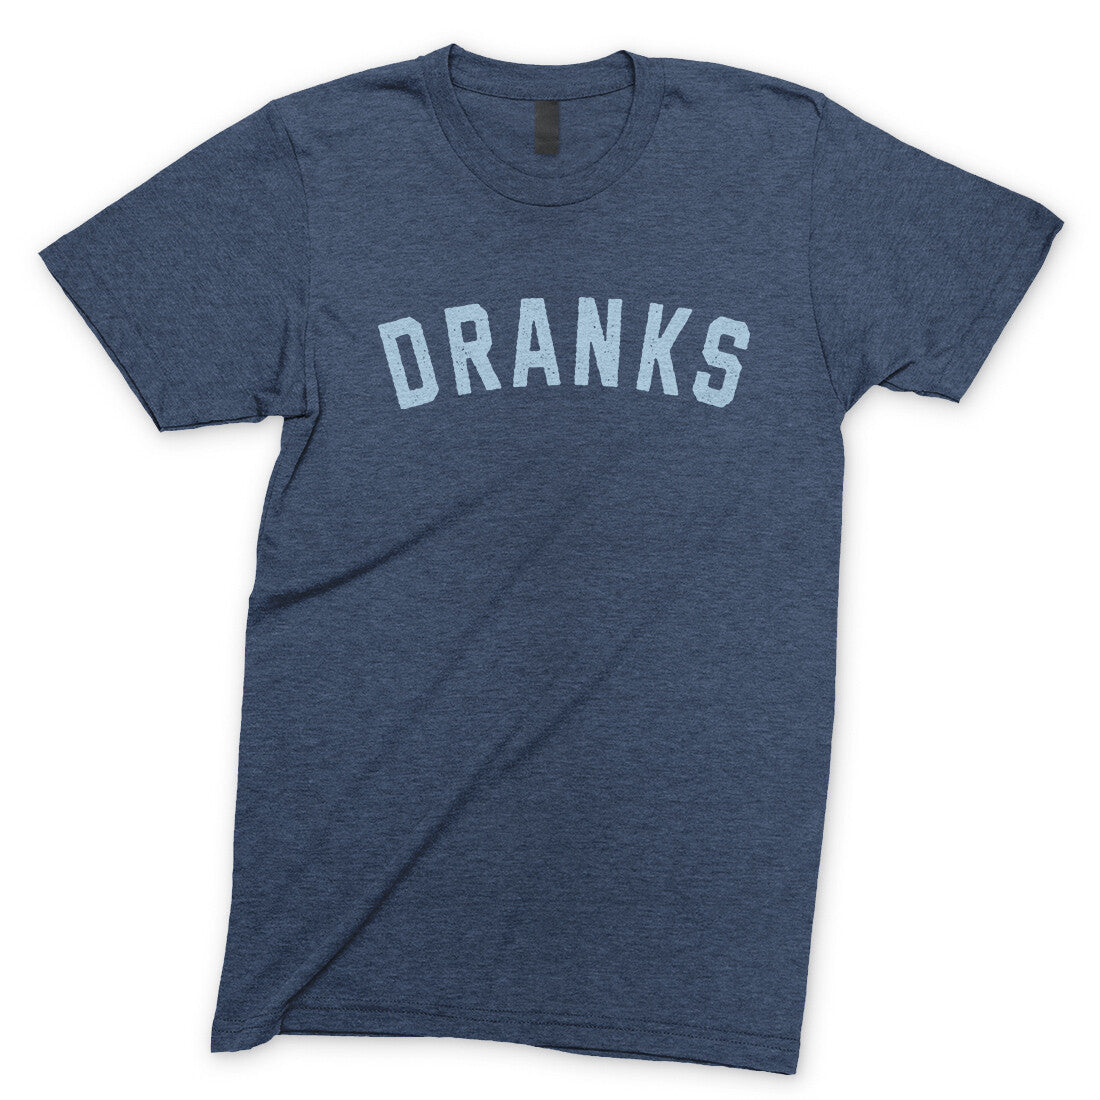 Dranks in Navy Heather Color